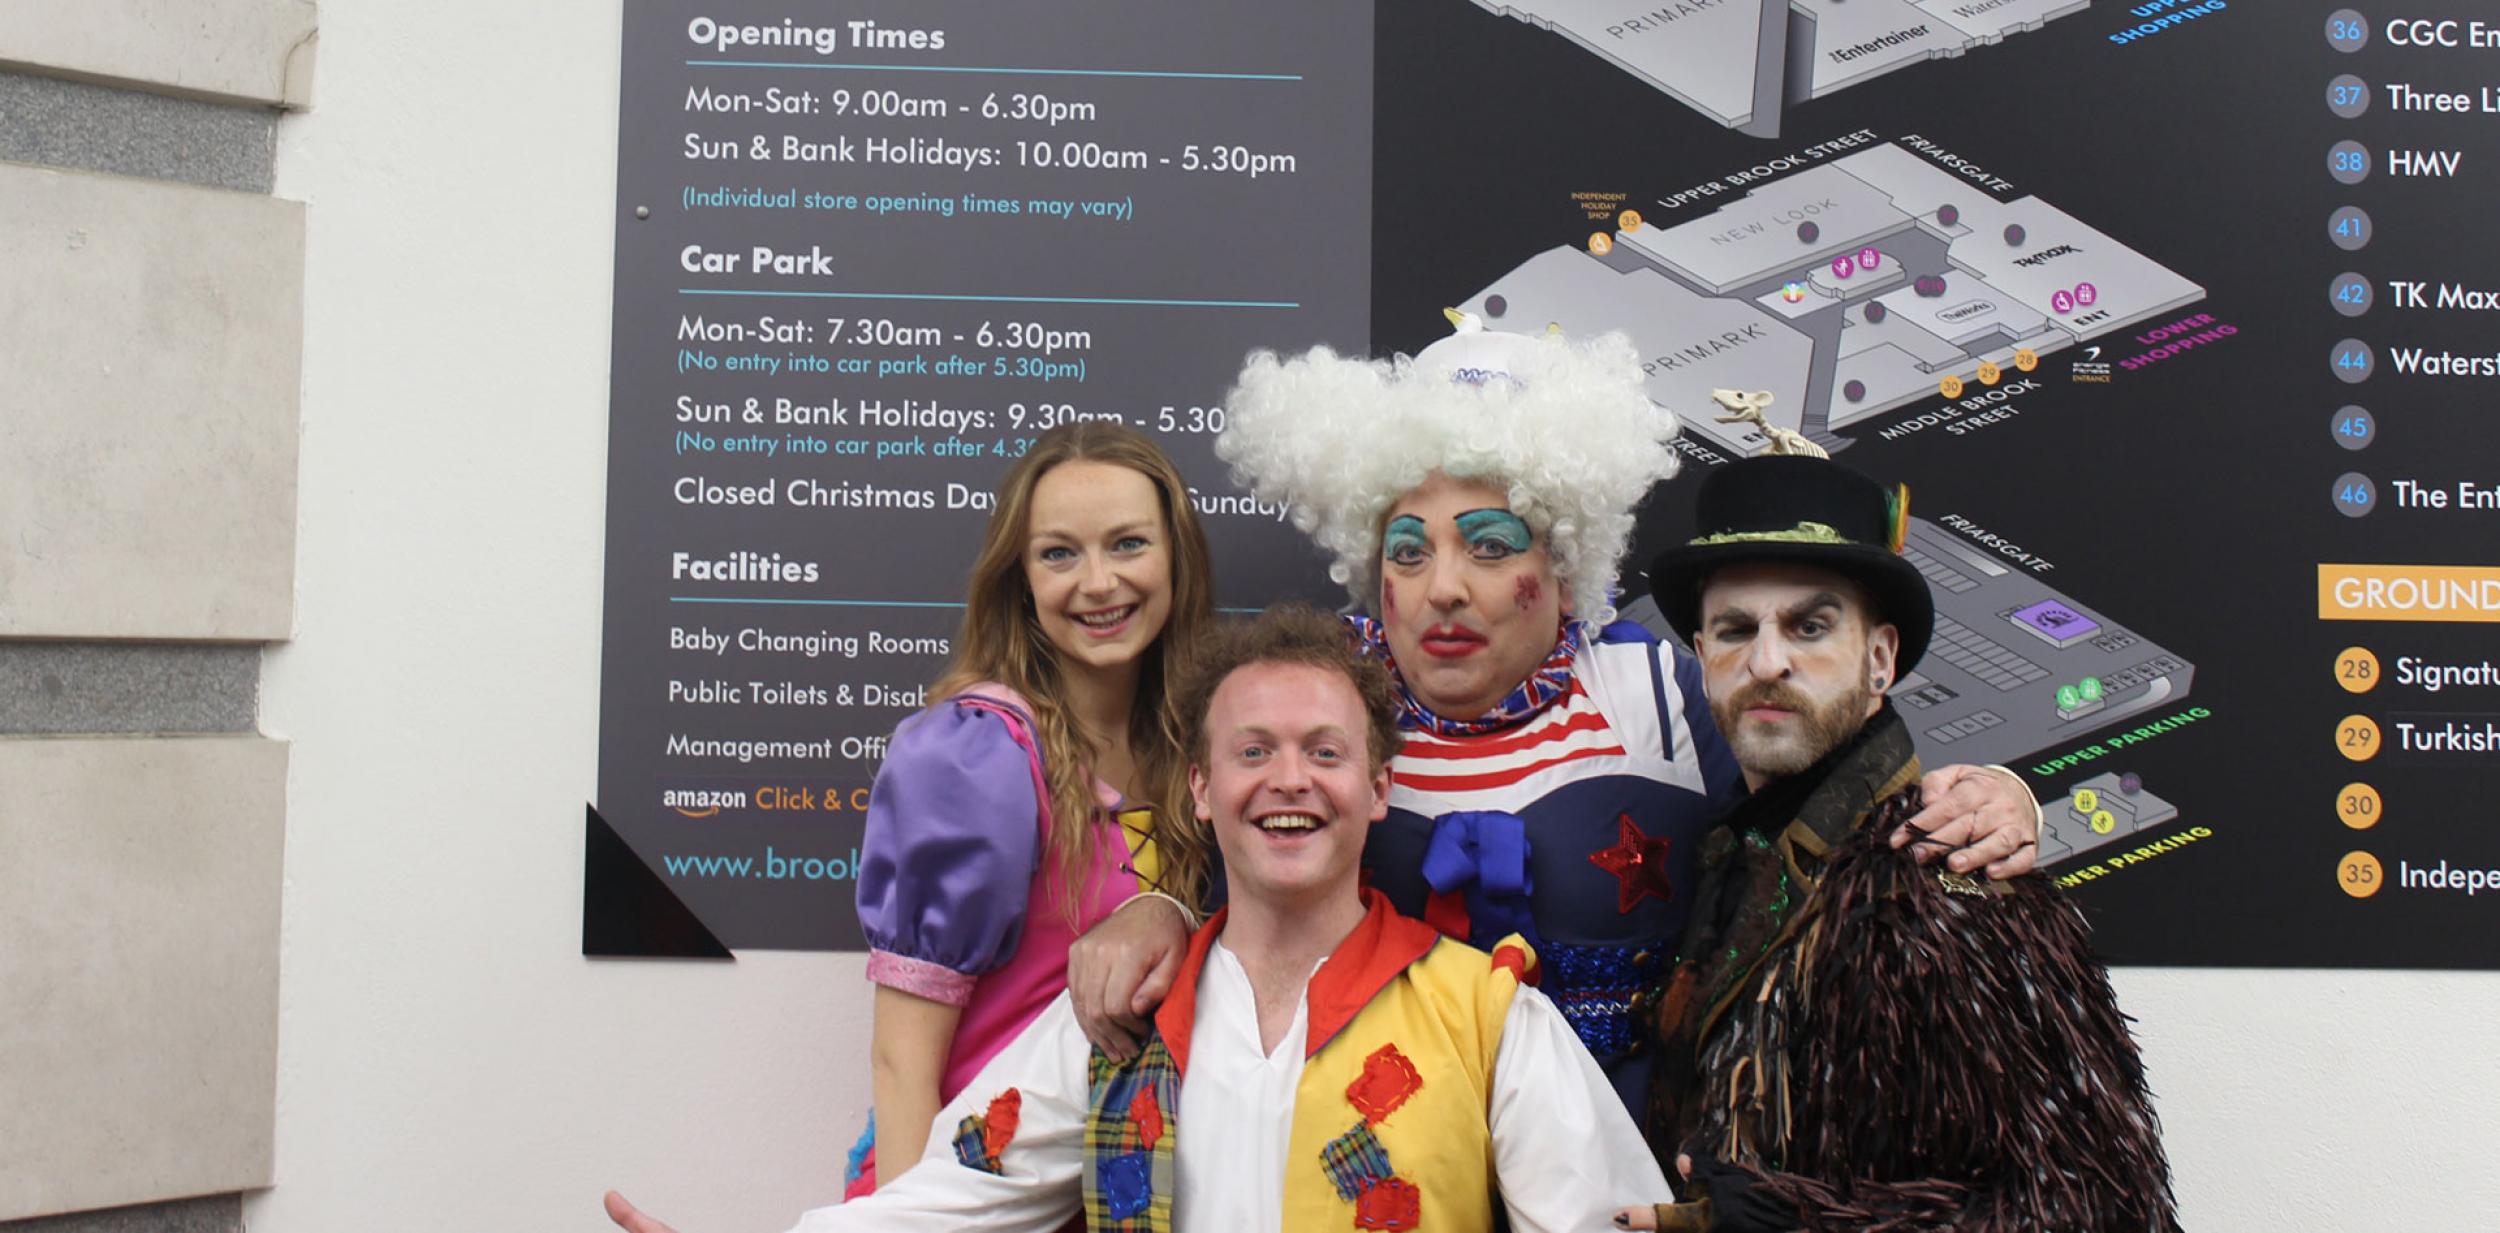 Panto cast at The Brooks Shopping Centre